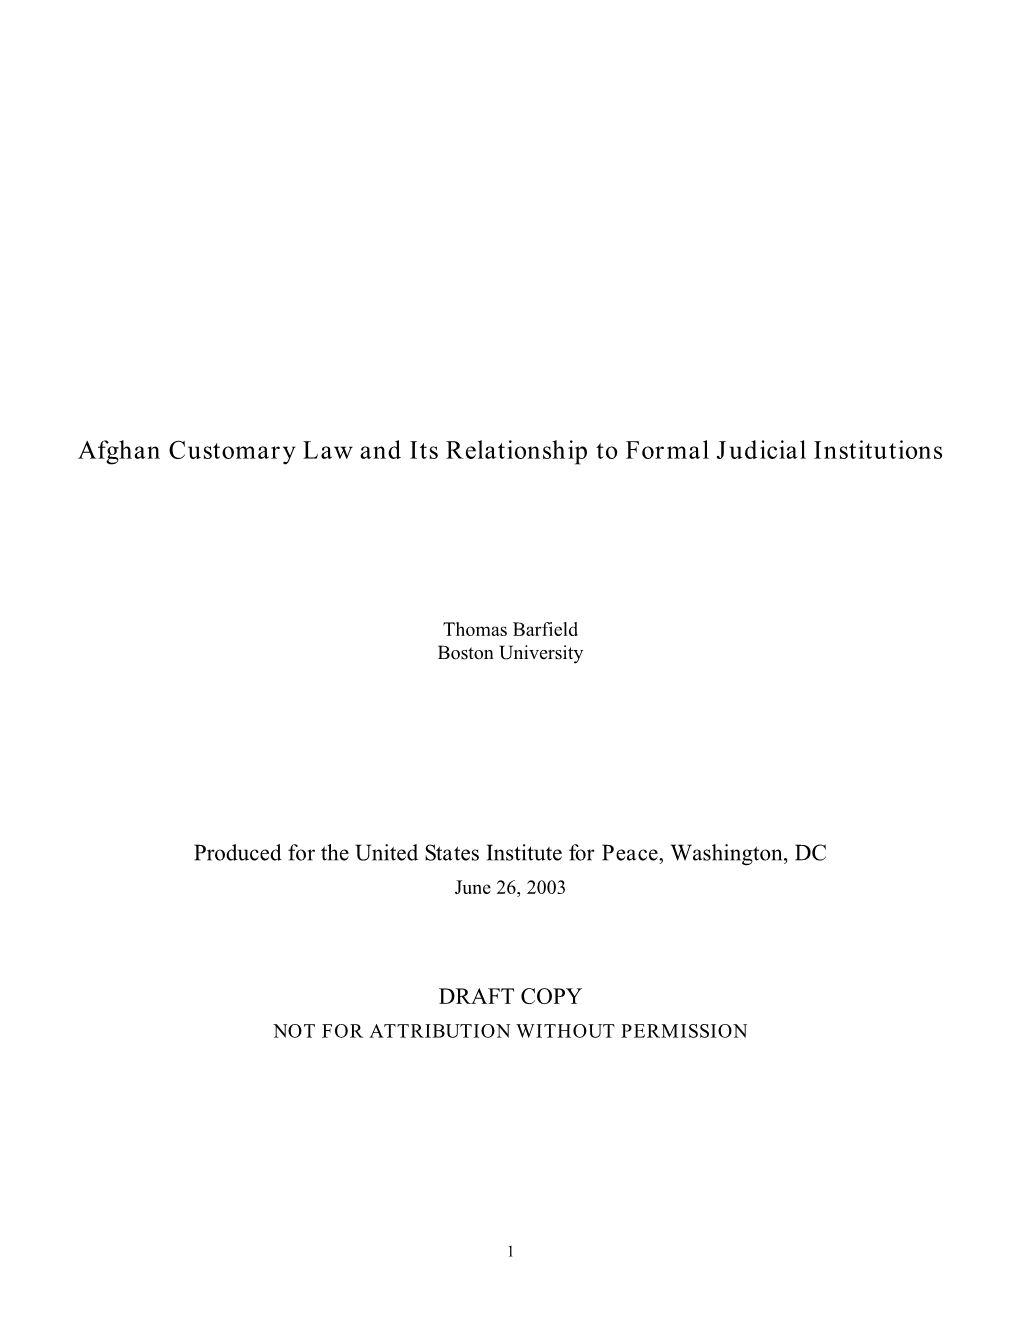 Afghan Customary Law and Its Relationship to Formal Judicial Institutions